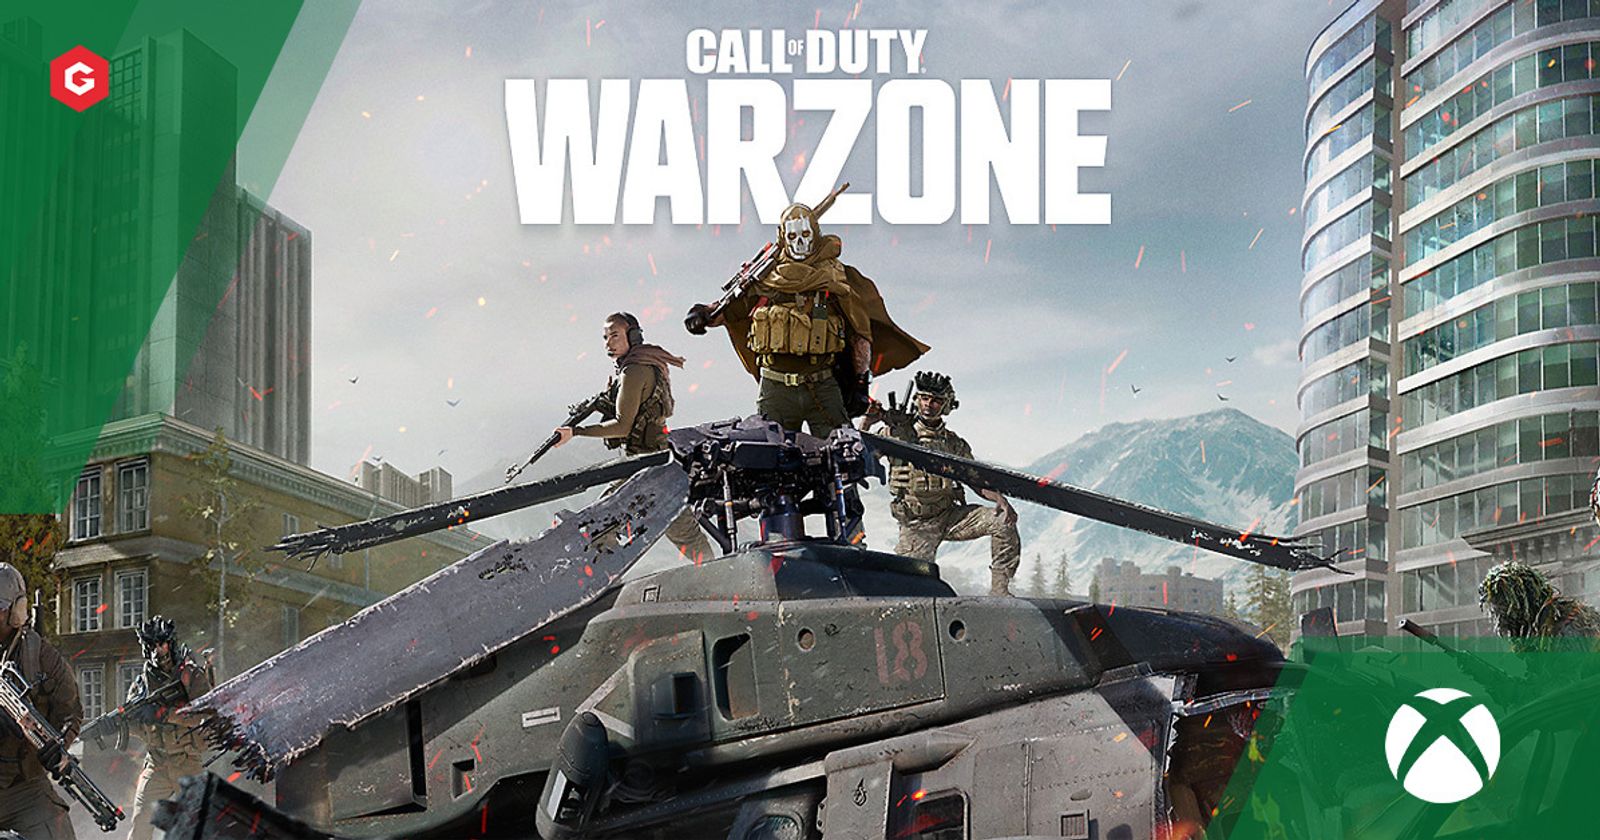 How To Download All Warzone 2 Content On Xbox - Guide